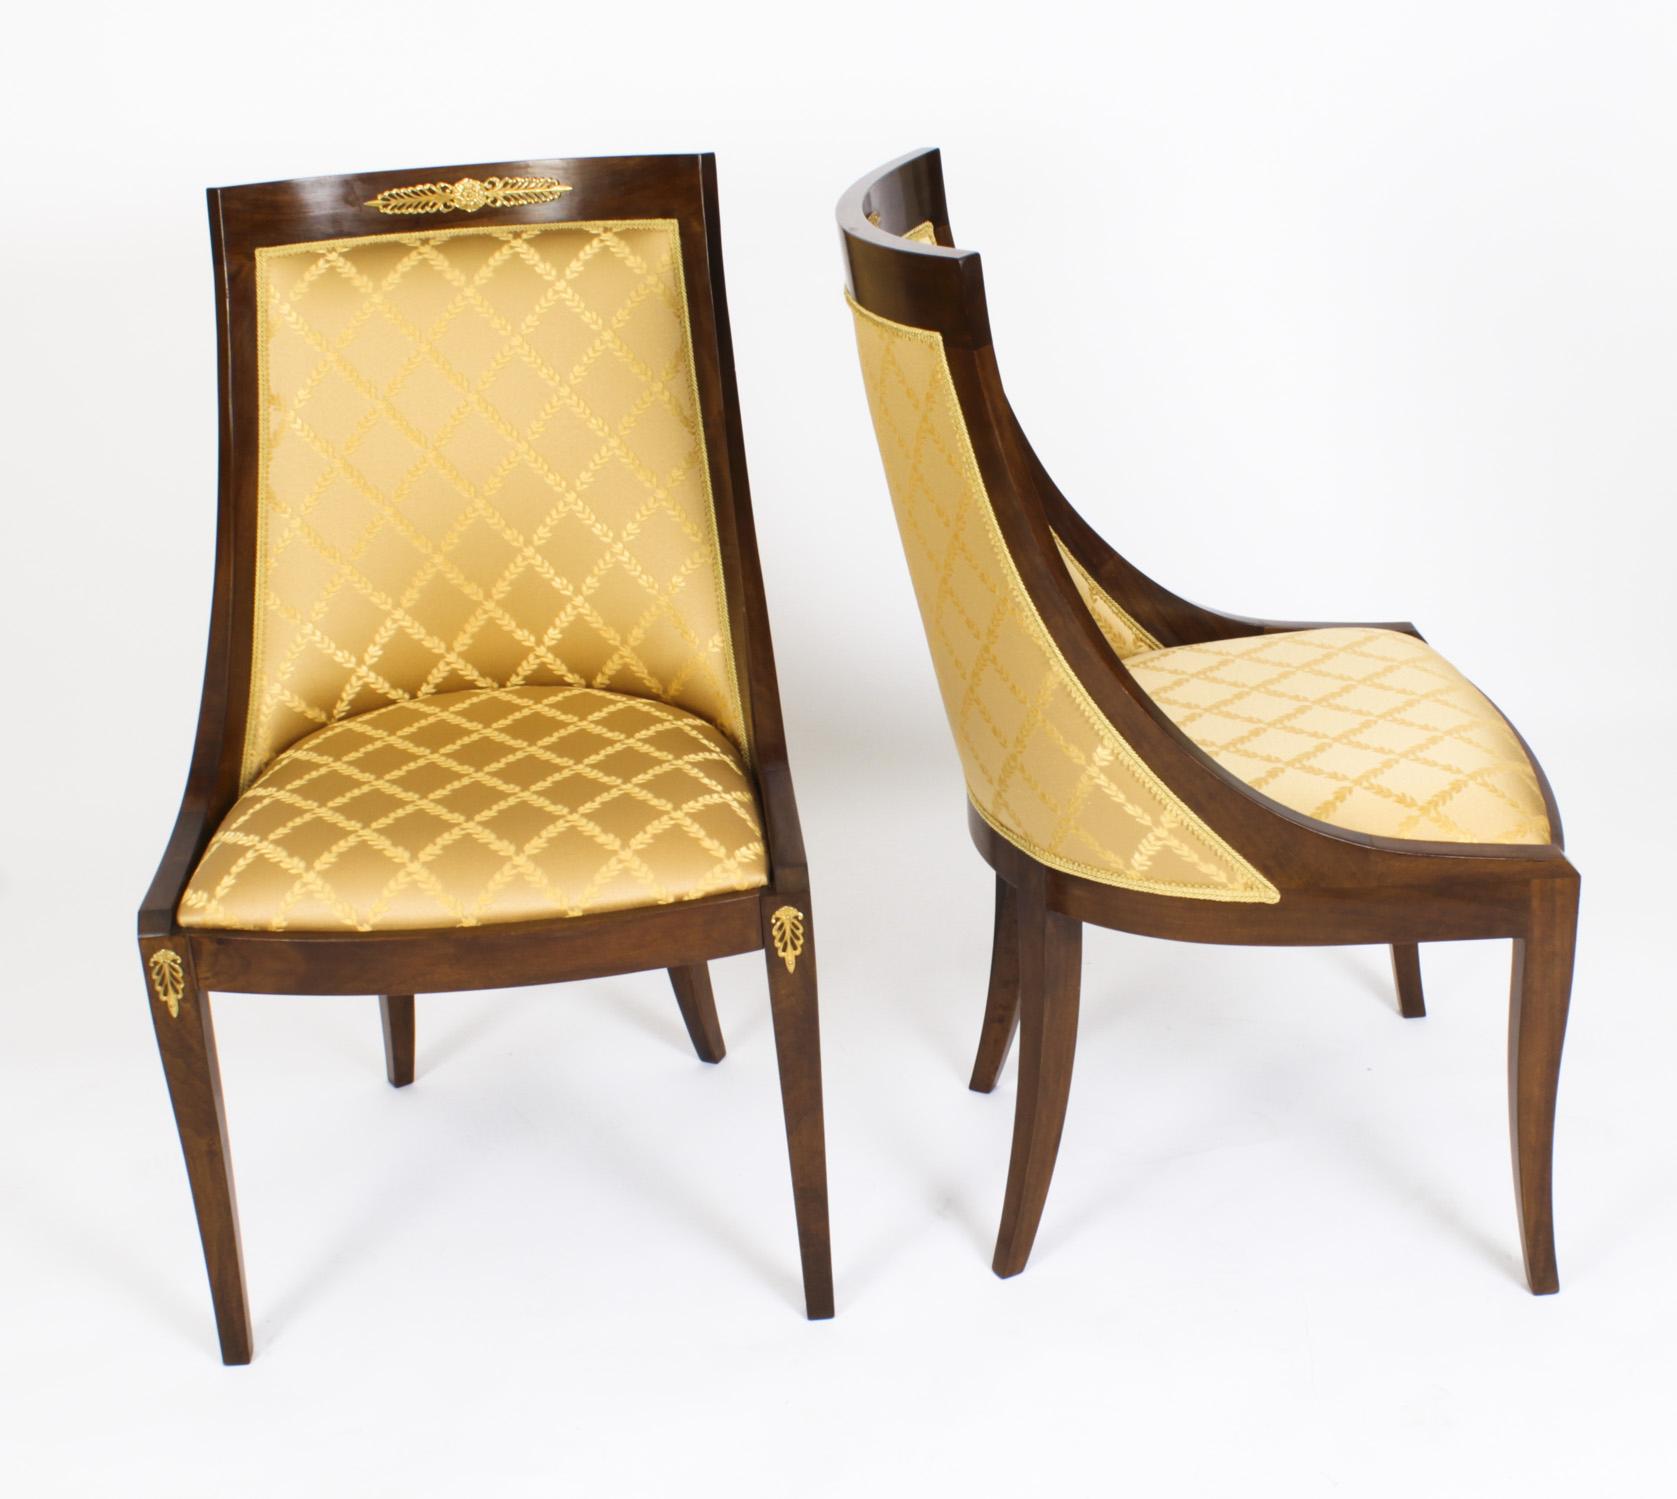 An absolutely fantastic vintage set of eight Empire Revival Gondola dining chairs, dating from the second half of the 20th Century.

The chairs are made from solid walnut that is beautiful in colour and has been embellished with striking ormolu